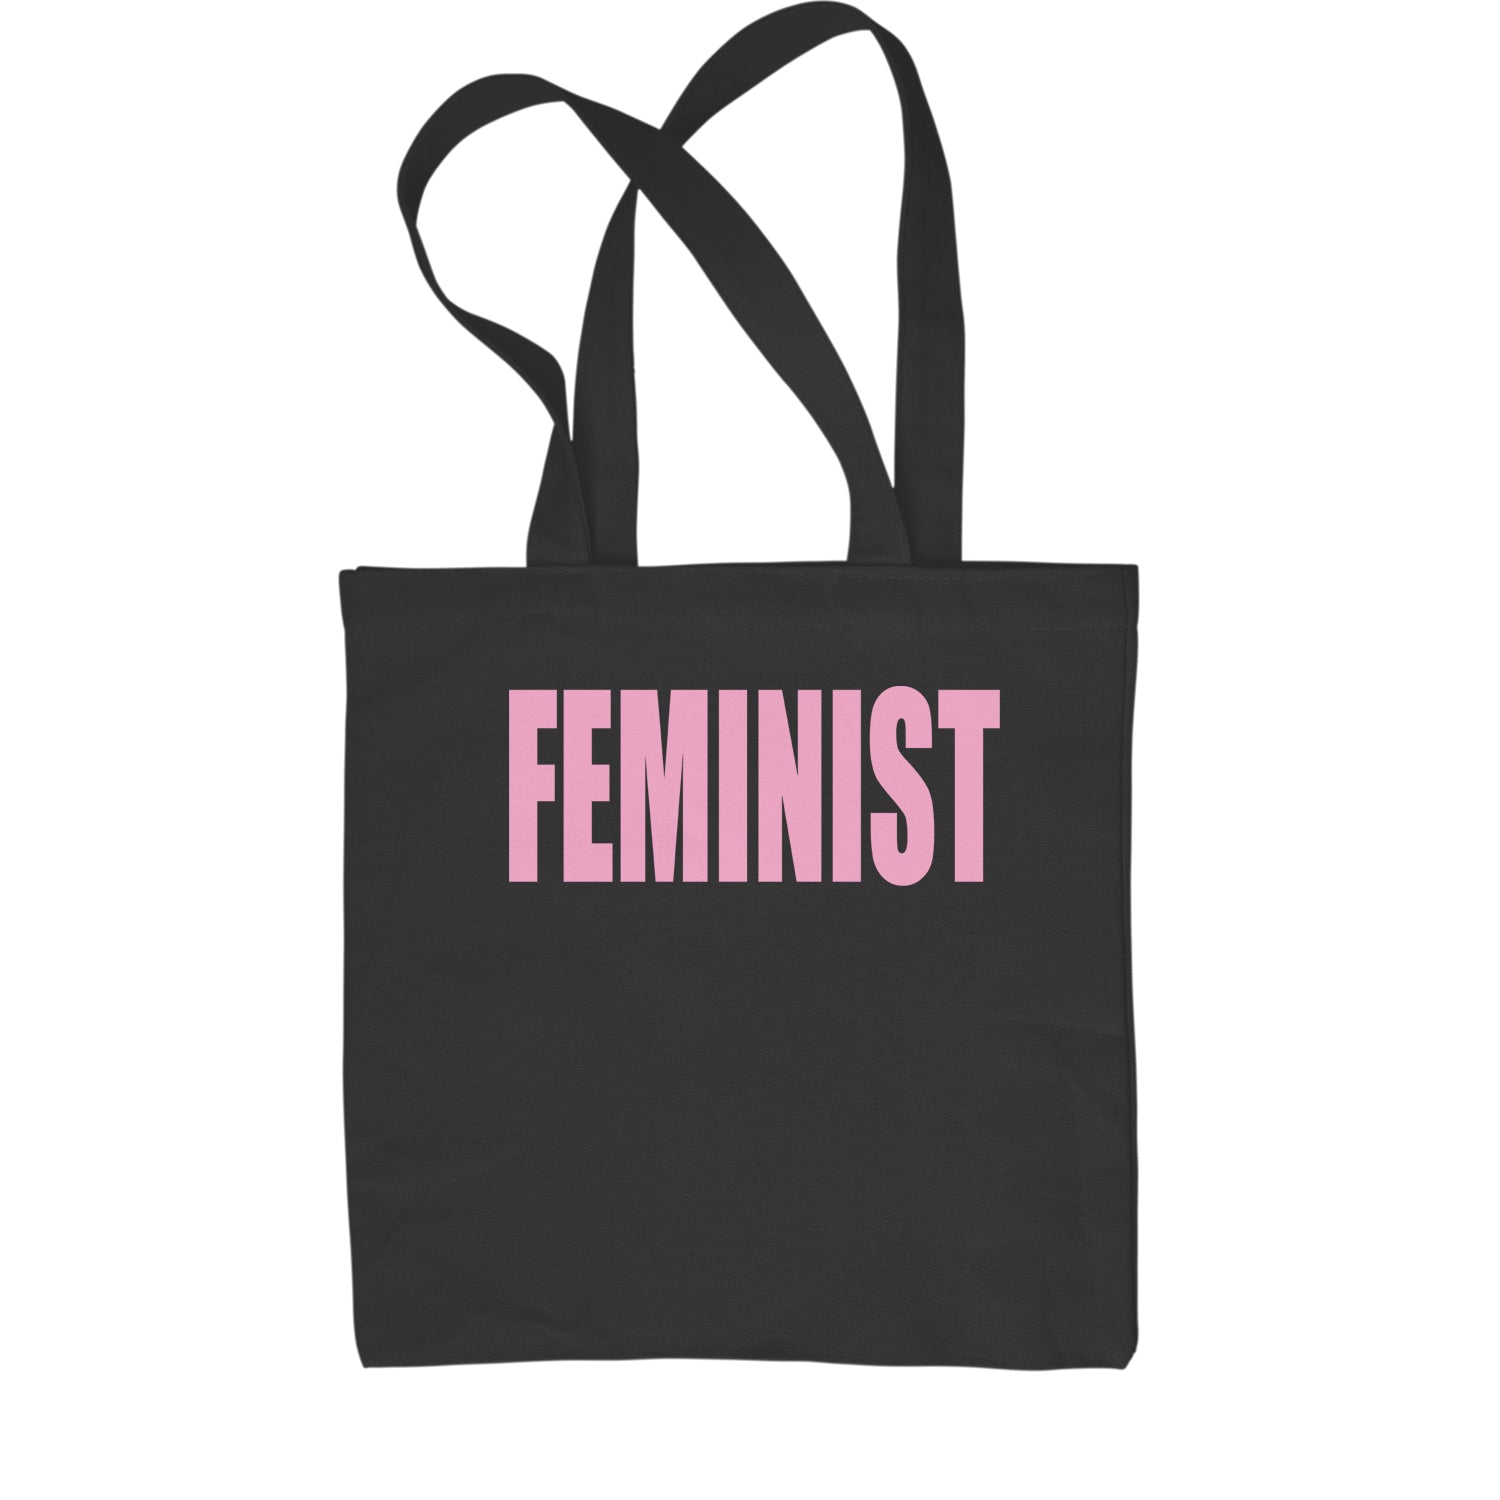 Feminist (Pink Print) Shopping Tote Bag a, equal, equality, feminism, feminist, gender, is, lgbtq, like, looks, nevertheless, pay, persisted, rights, she, this, what by Expression Tees